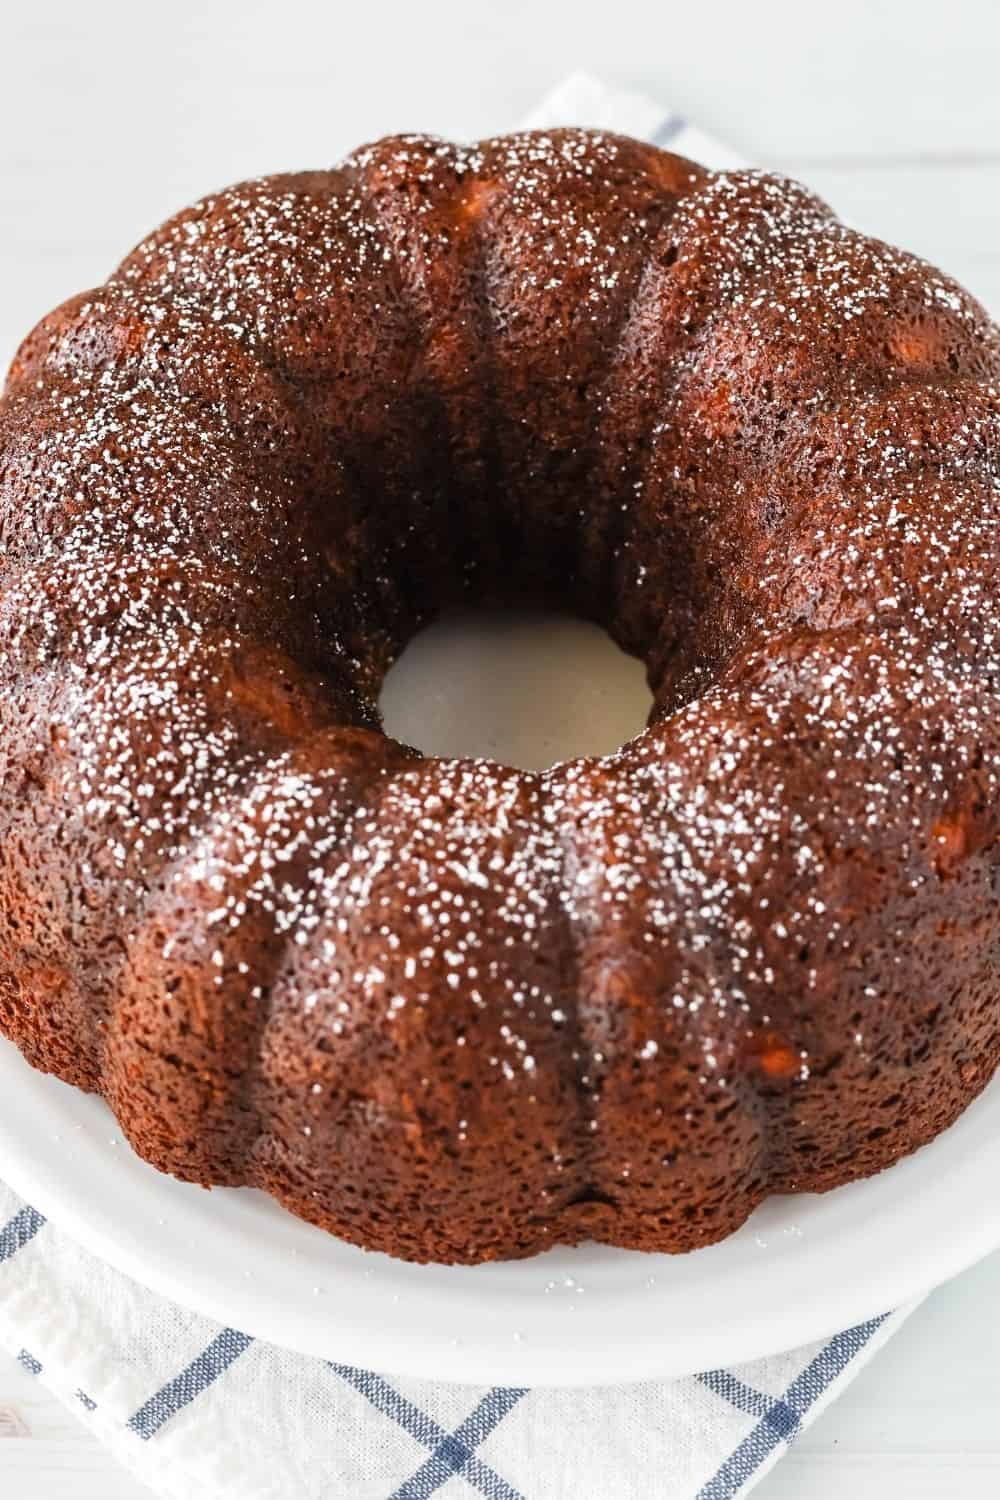 whole bundt cake made with bananas and pears, dusted with powdered sugar and served on a white platter.